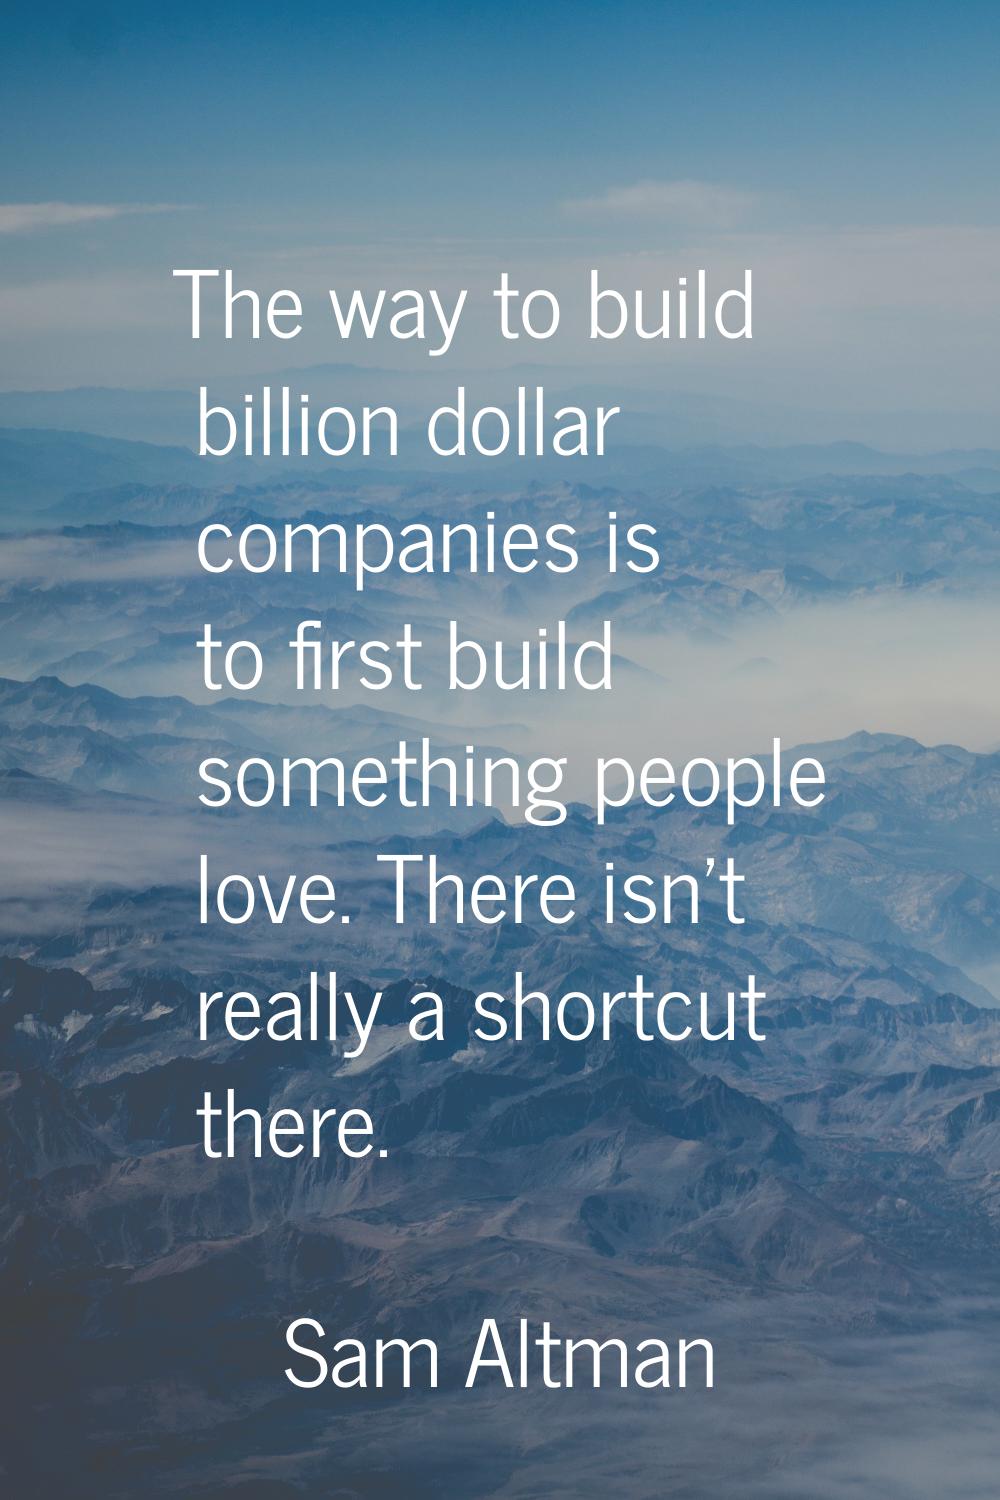 The way to build billion dollar companies is to first build something people love. There isn't real